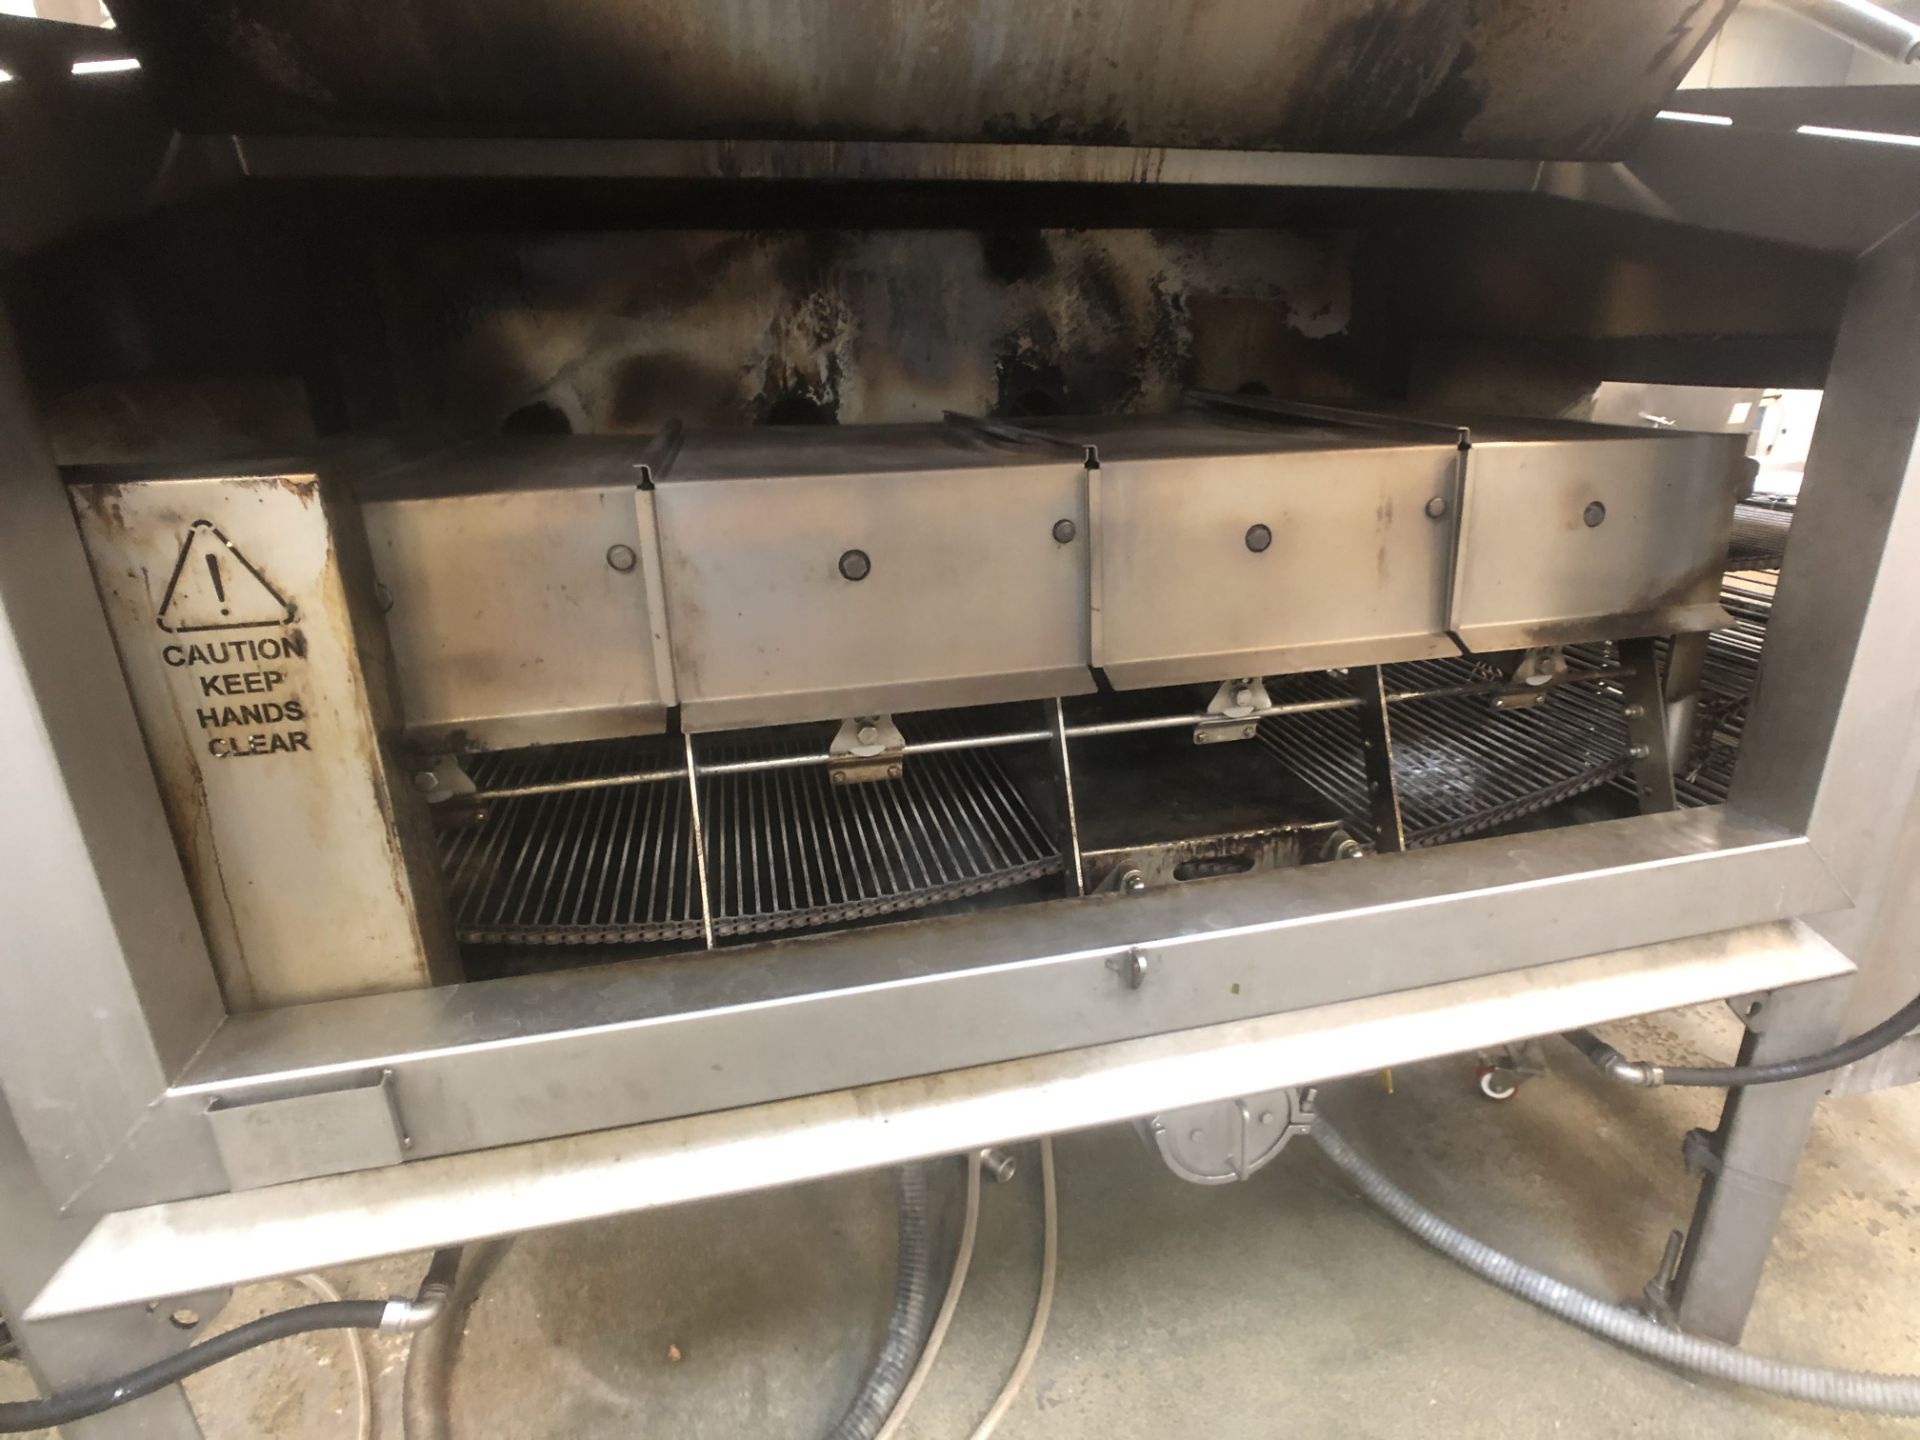 2019 Unitherm Food Systems 24" Flame Grill with Preheat, Model FG-24-8B-P, S/N FLGR-2485, Includes - Image 14 of 19